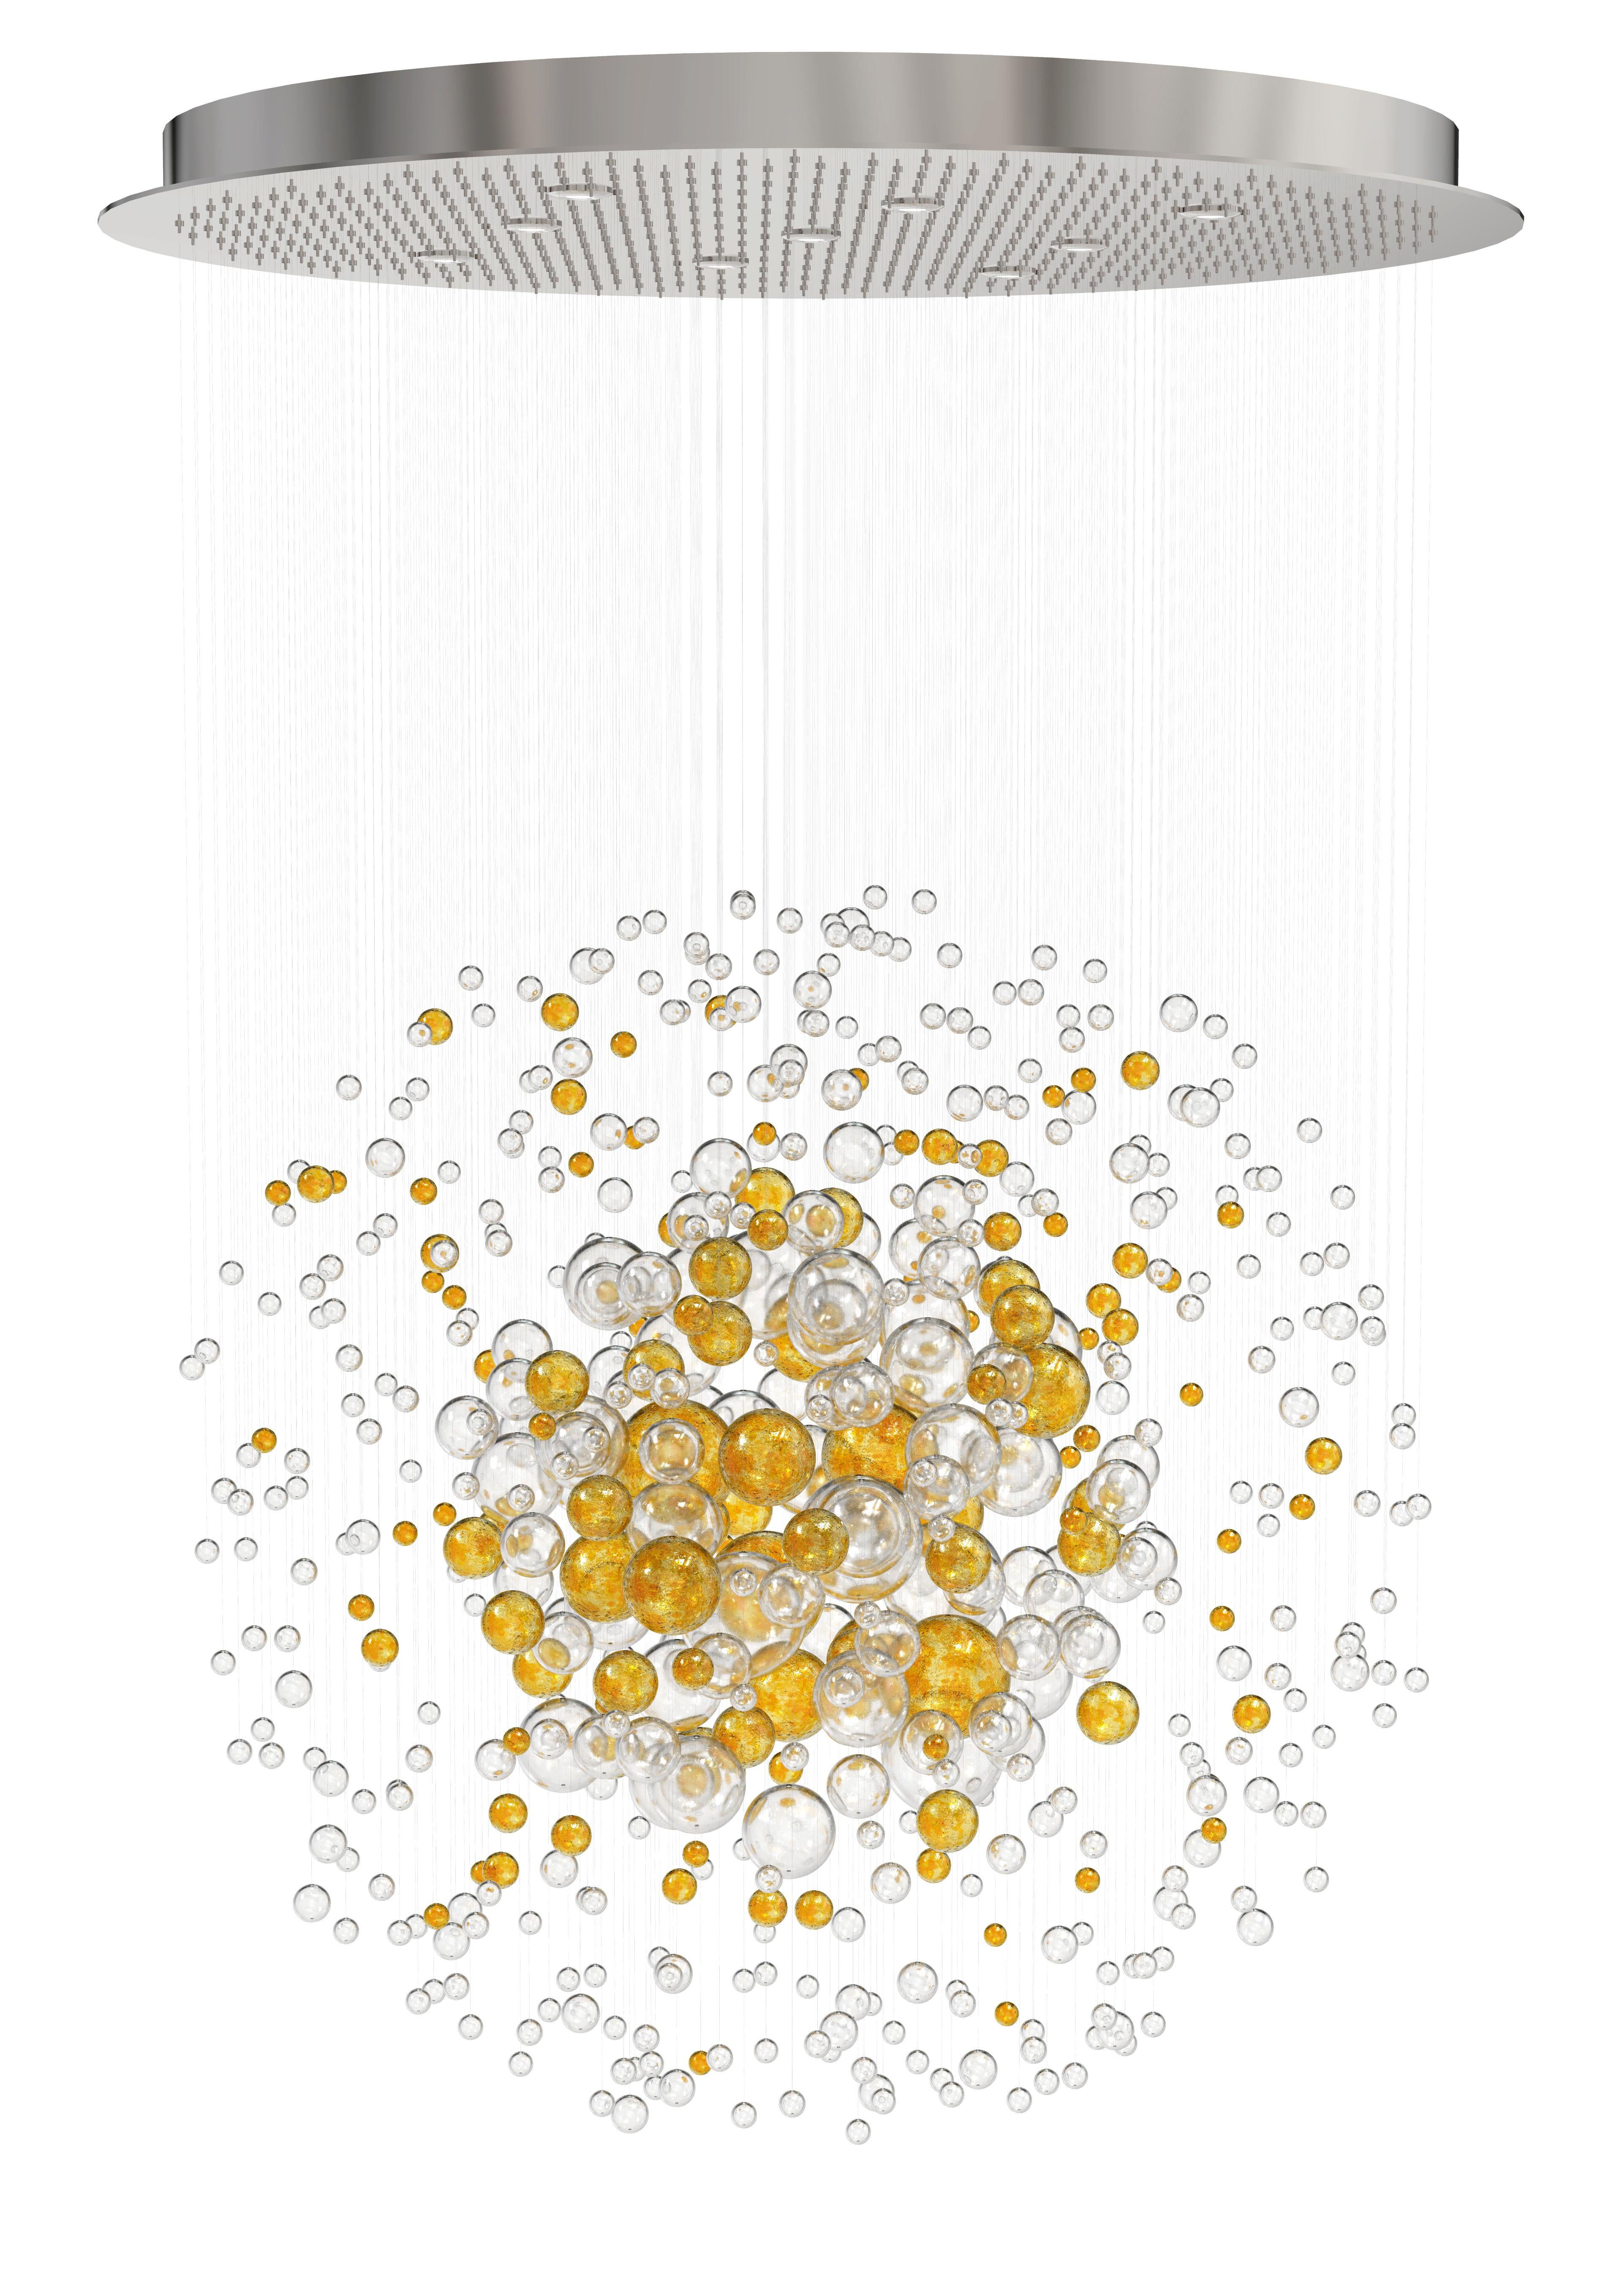 Bubbles in Space is an icon of organic timeless design.
This ethereal object is a rendition of an explosion of bubbles in space which transports the viewer to an unreal world of pure fascination. It evokes bubbles in champagne fizzing through the